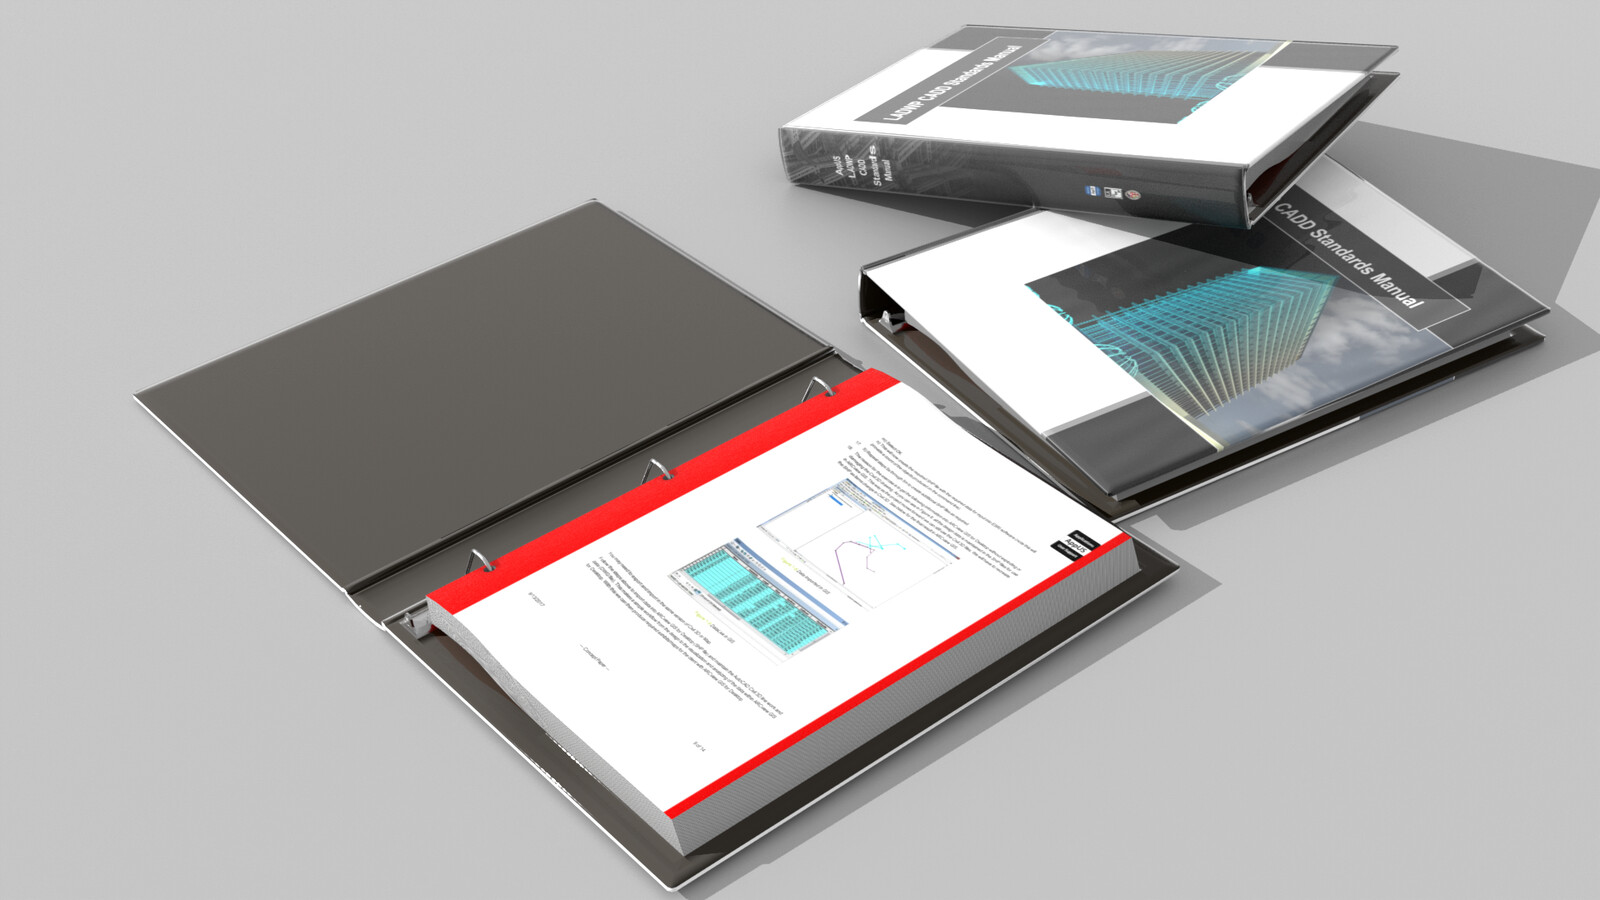 Technical documentation pre-viz - this is the final design of the AppUS Technical Documentation Binder.